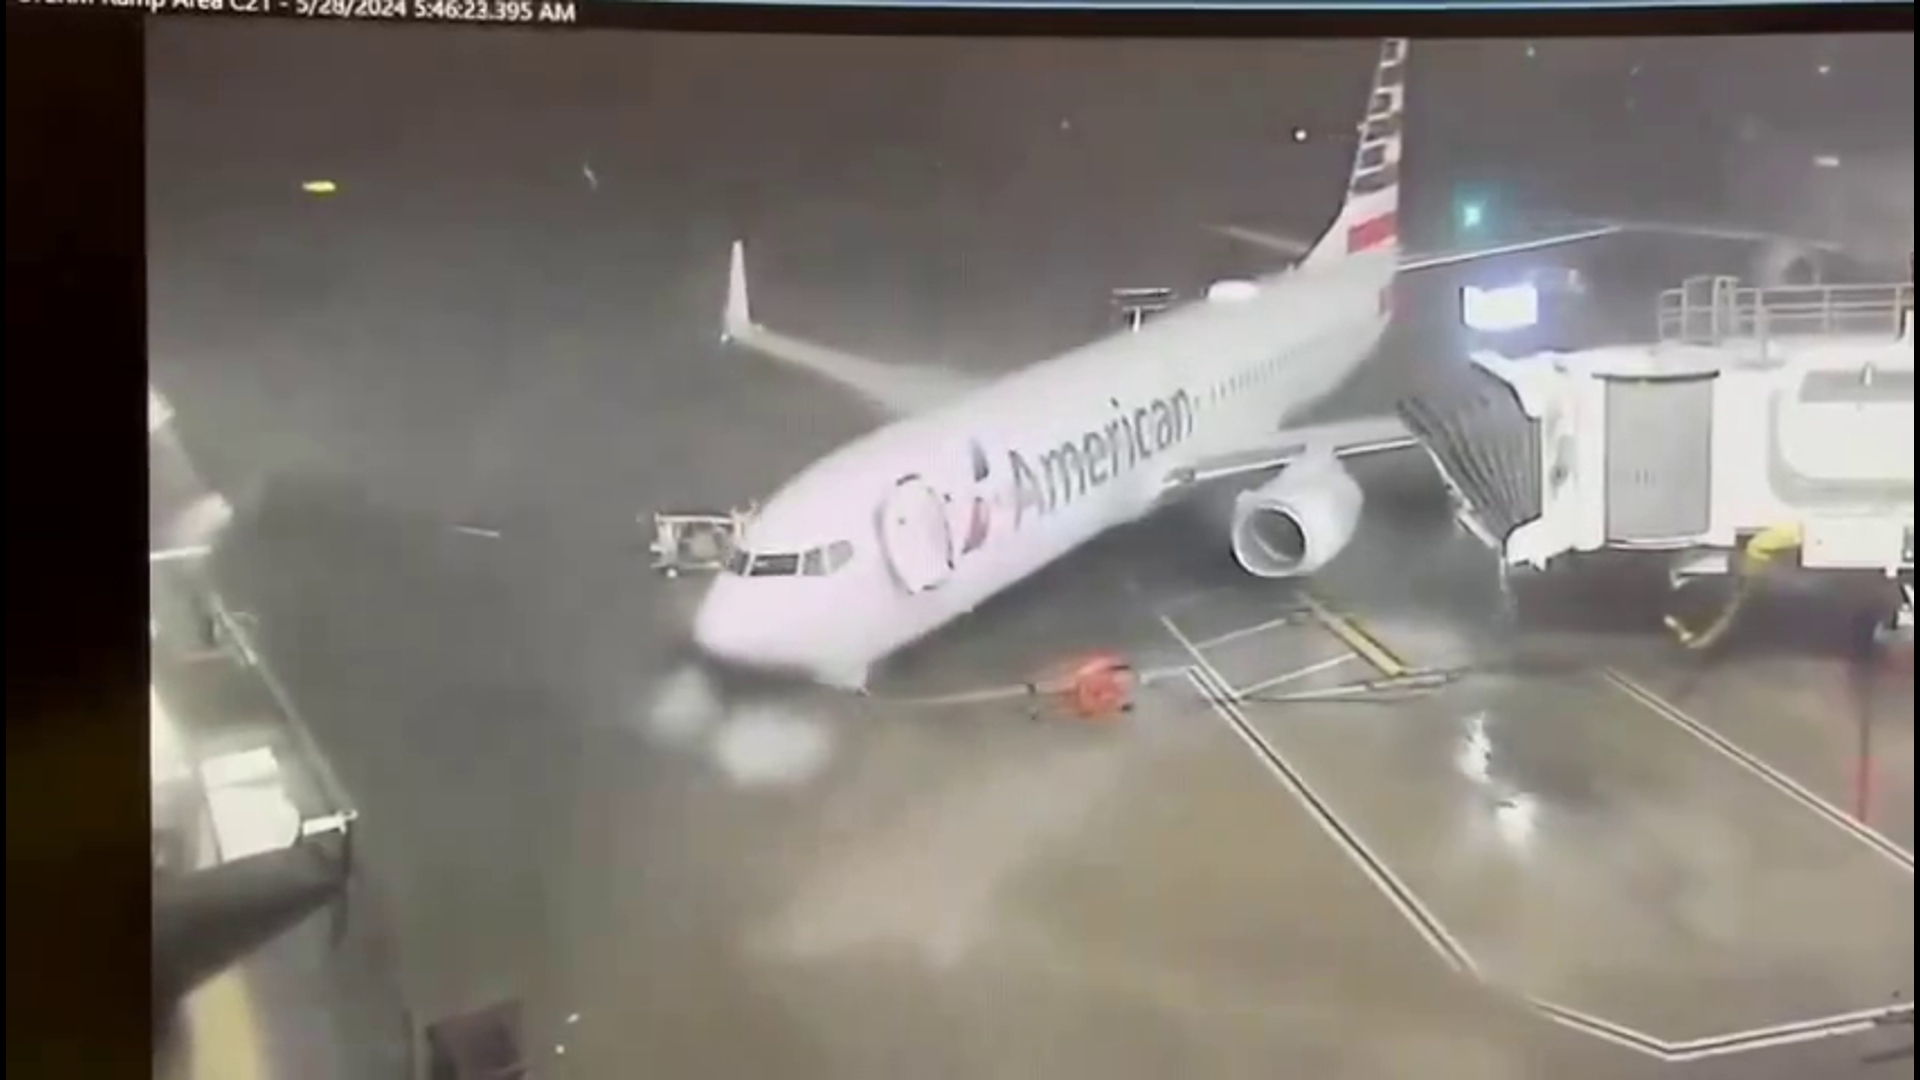 Tuesday morning the heavy winds and rain ripped an airplane from the jet bridge at DFW International Airport.